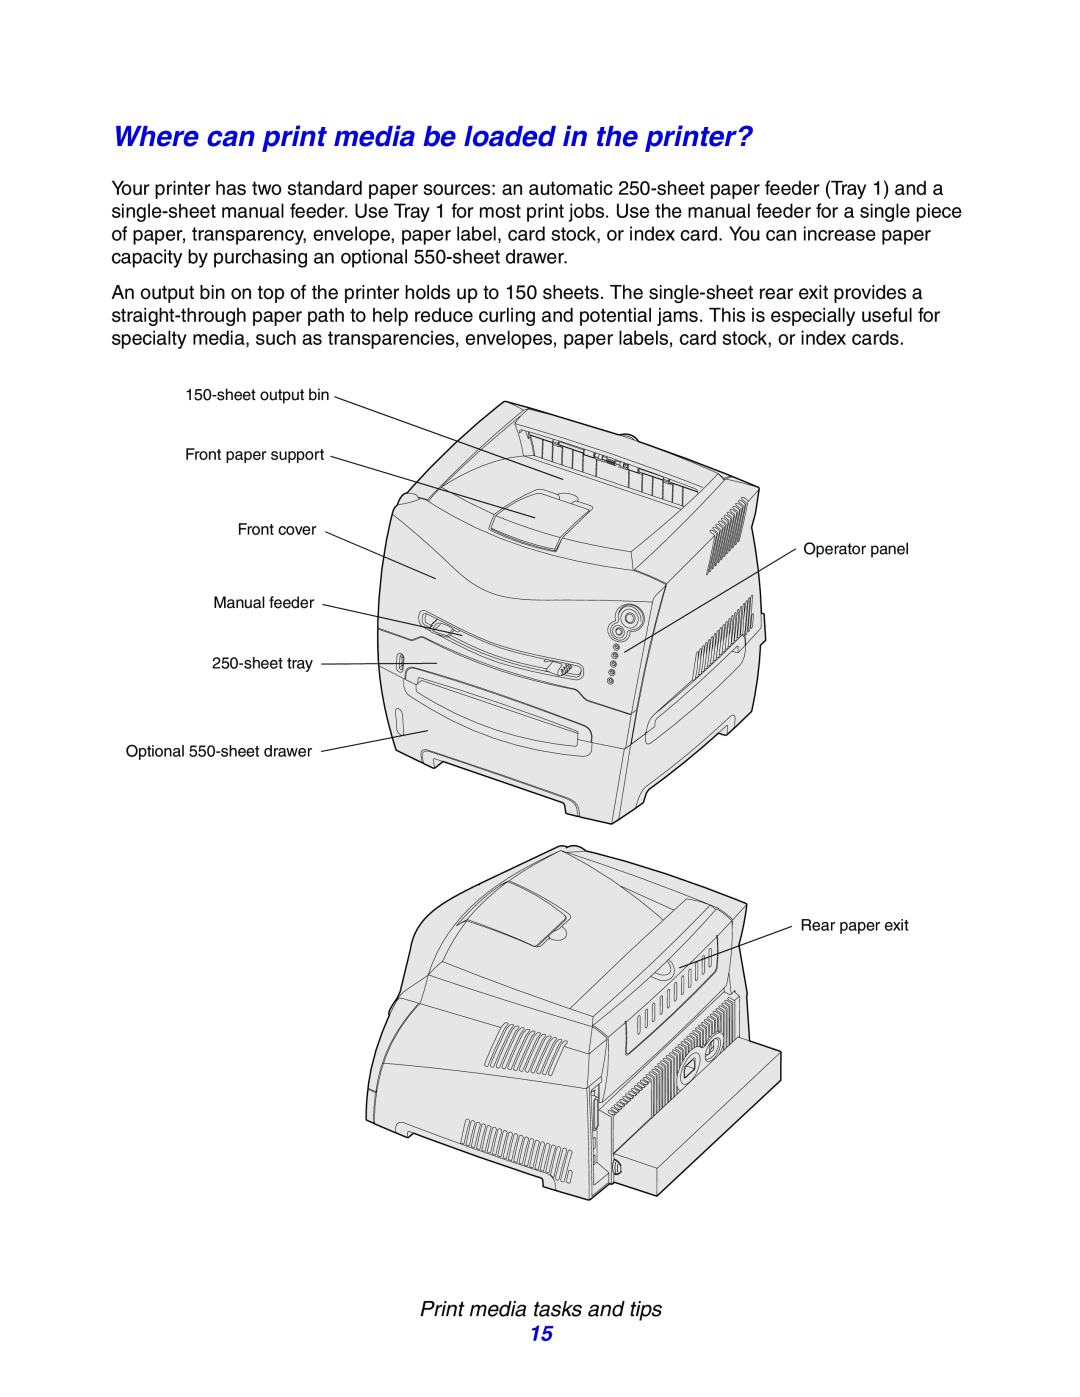 Lexmark E234N manual Where can print media be loaded in the printer?, Print media tasks and tips, Rear paper exit 